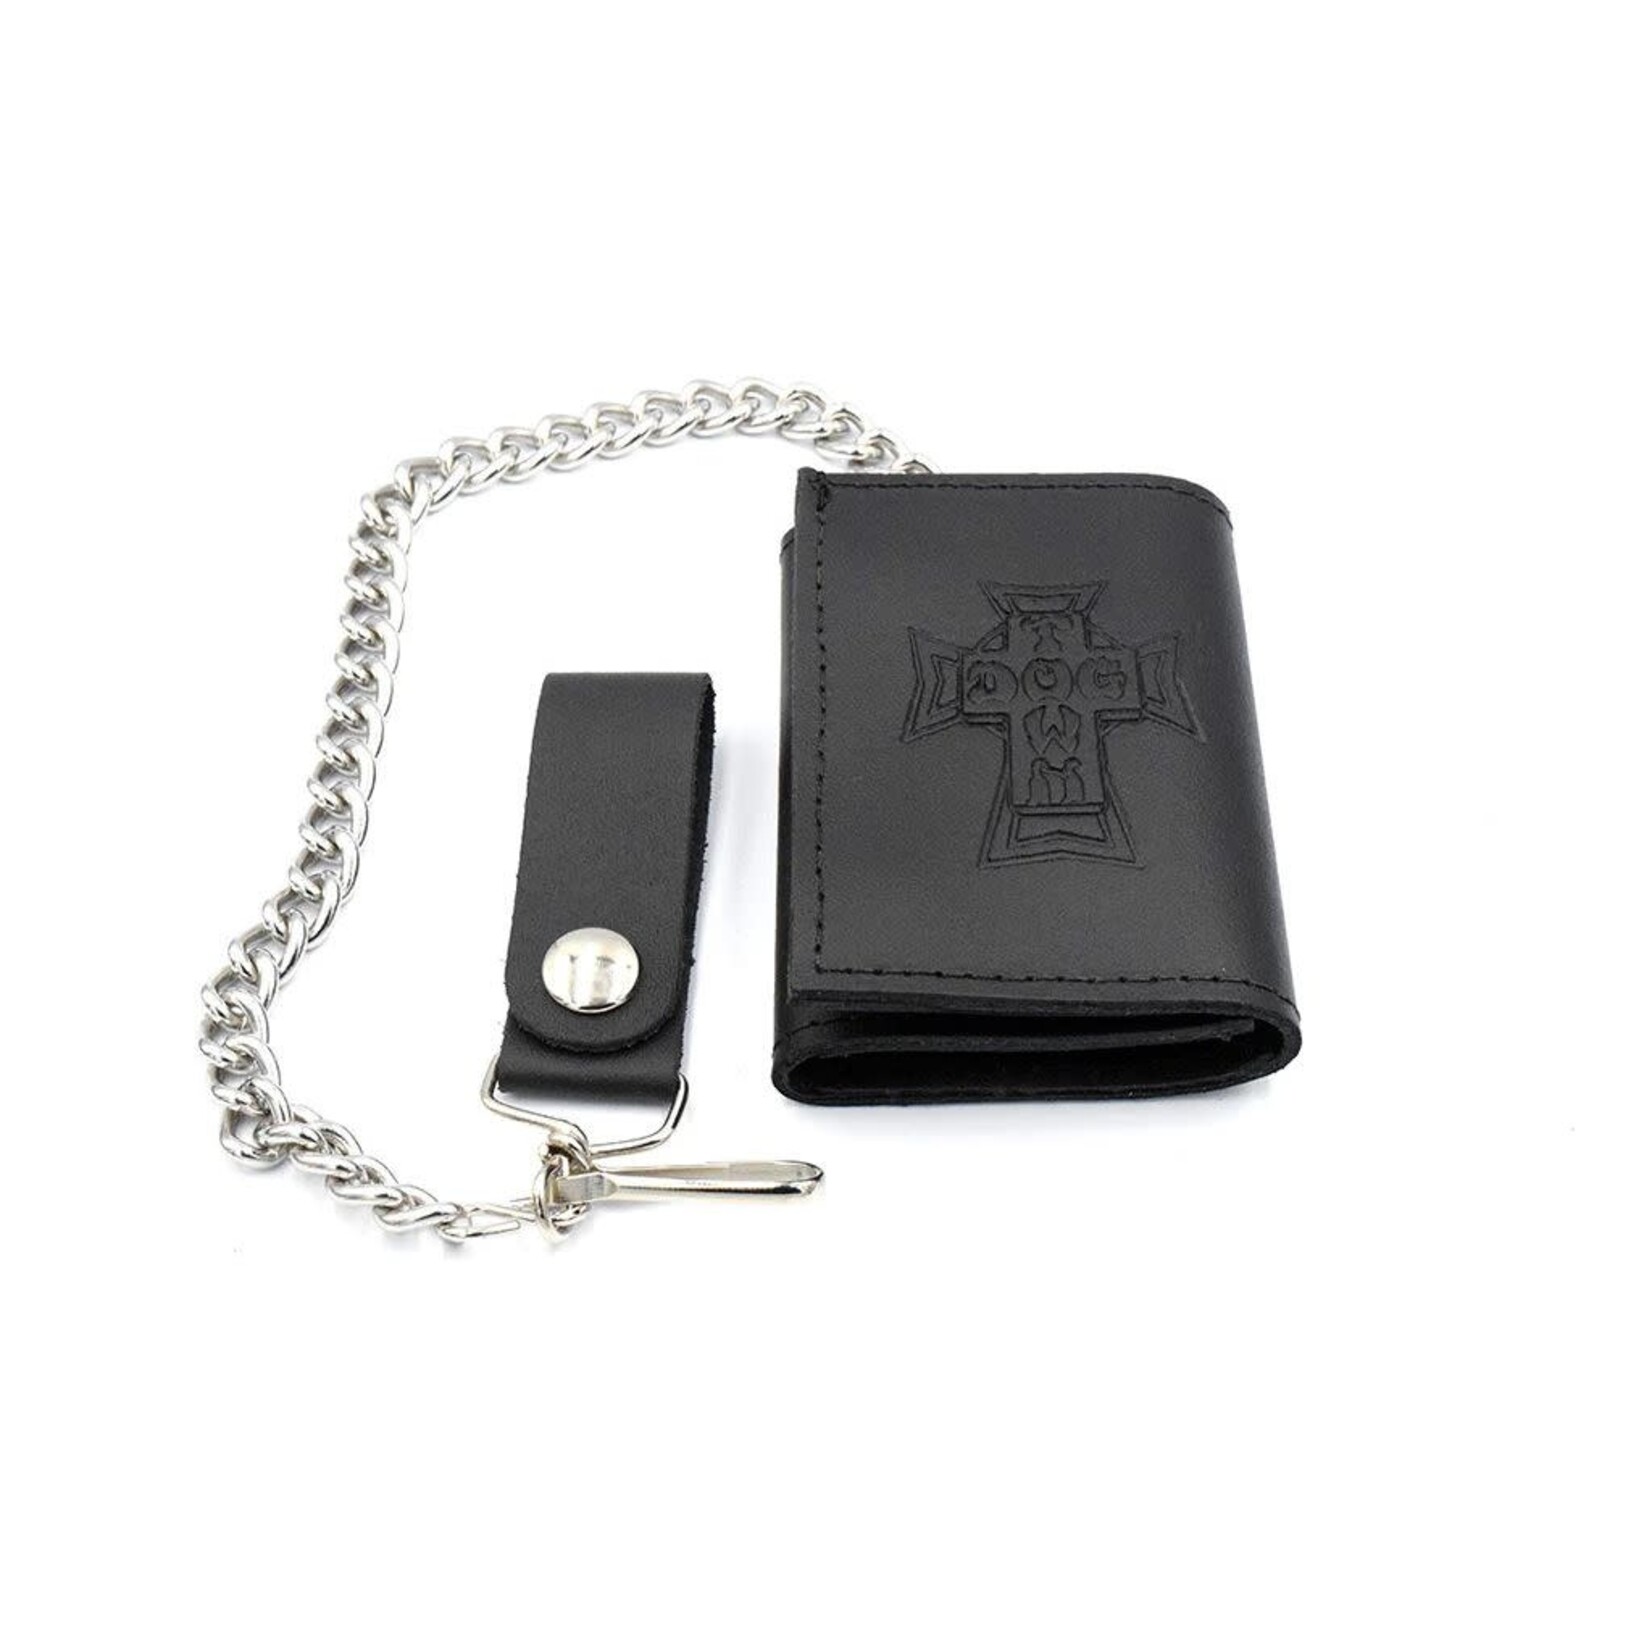 Dogtown Dogtown Vintage Cross Small Leather Trifold Chain Wallet - Black